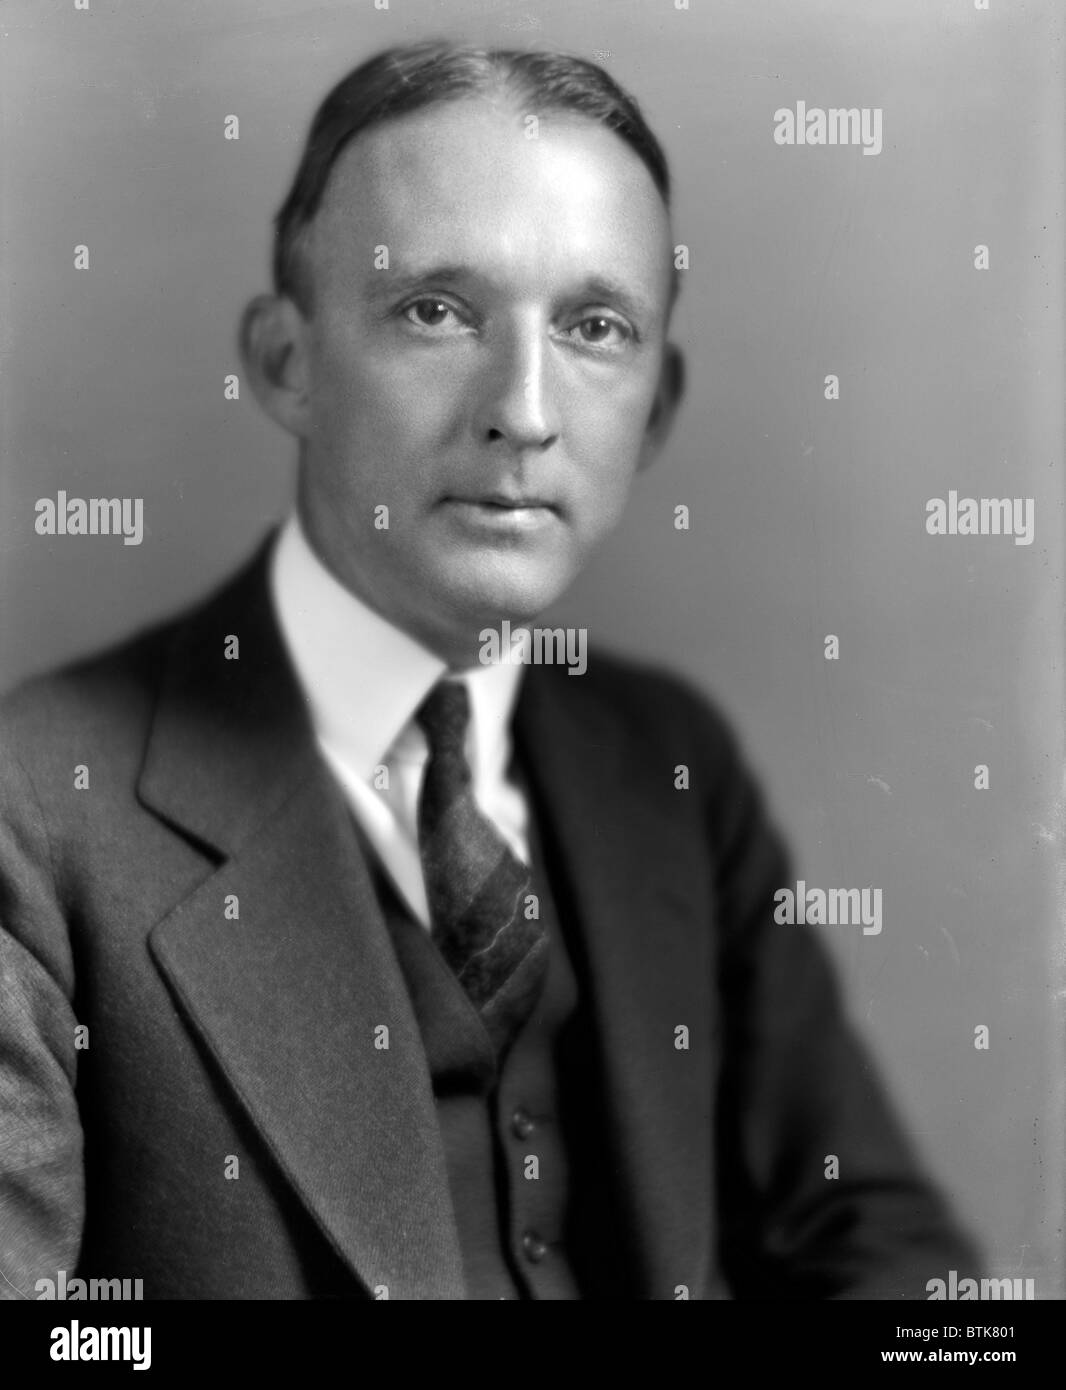 Justice Hugo Black of the US Supreme Court. ca. late 1930s. Stock Photo